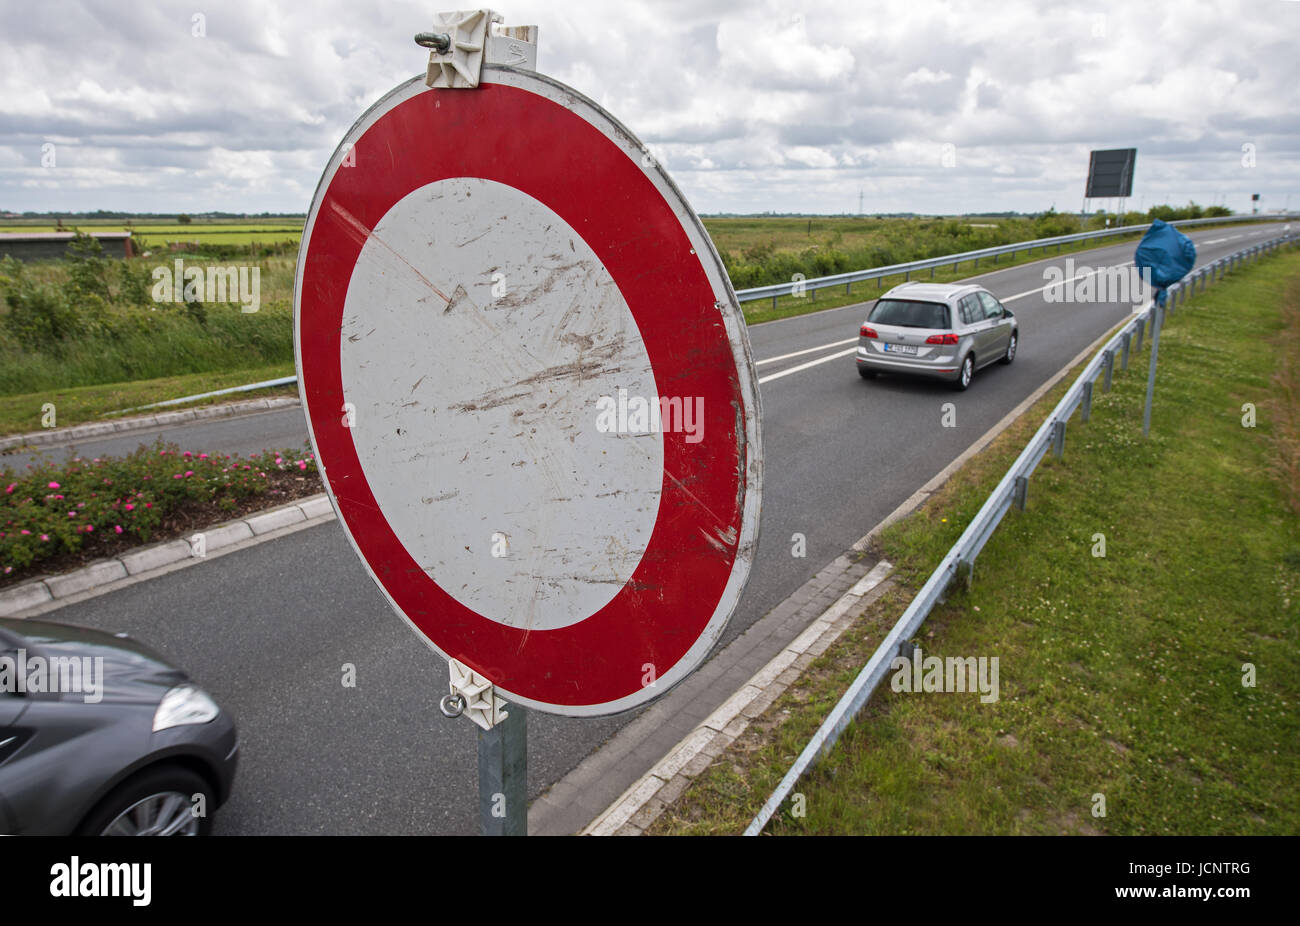 A 'Durchfahrt verboten' (lit. passage forbidden) sign stands at the eintrance of the bypass of Bensersiel, Germany, 16 June 2017. Now the traffic has to go through the narrow road of the coastal city again. Thereby the six-year-old illegaly built bypass finally was closed after a fierce lawsuit. Photo: Ingo Wagner/dpa Stock Photo